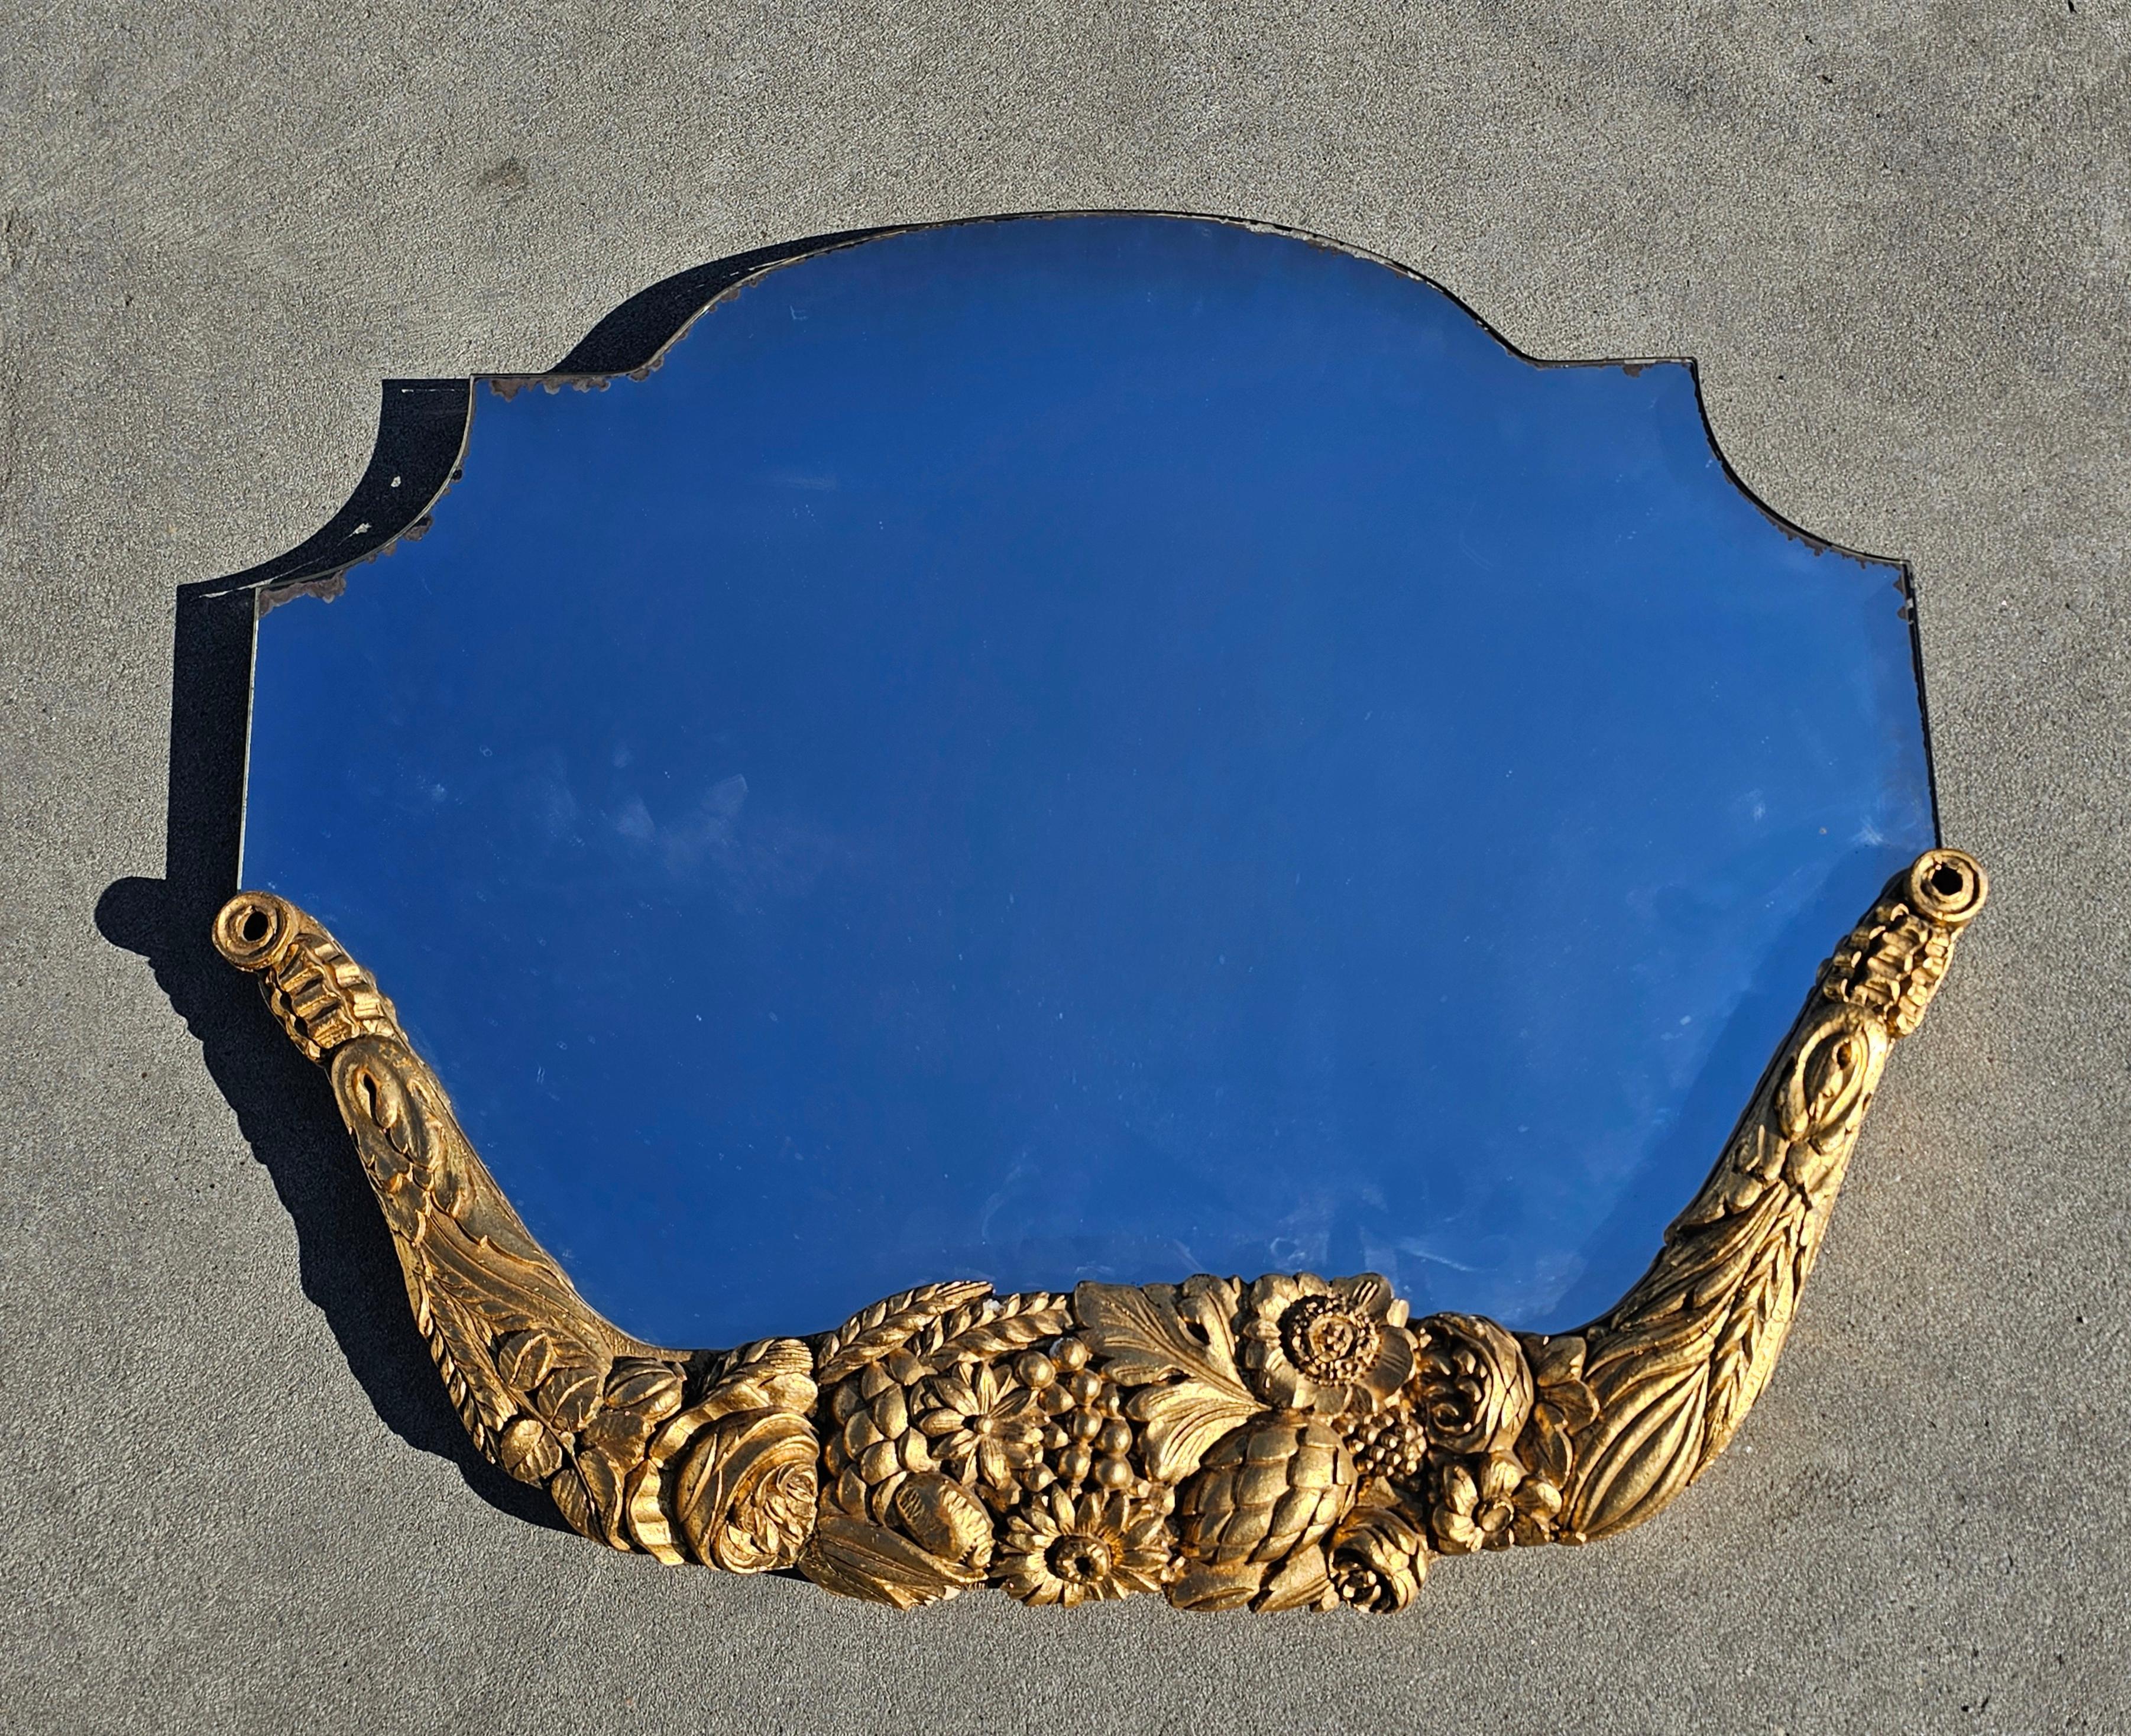 In this listing you will find an extremely attractive antique French wall mirror with unique shape and hand carved gilt wood frame with rich floral ornaments. Made in France in the end of 19th century. 

Mirror is in good antique condition. It shows